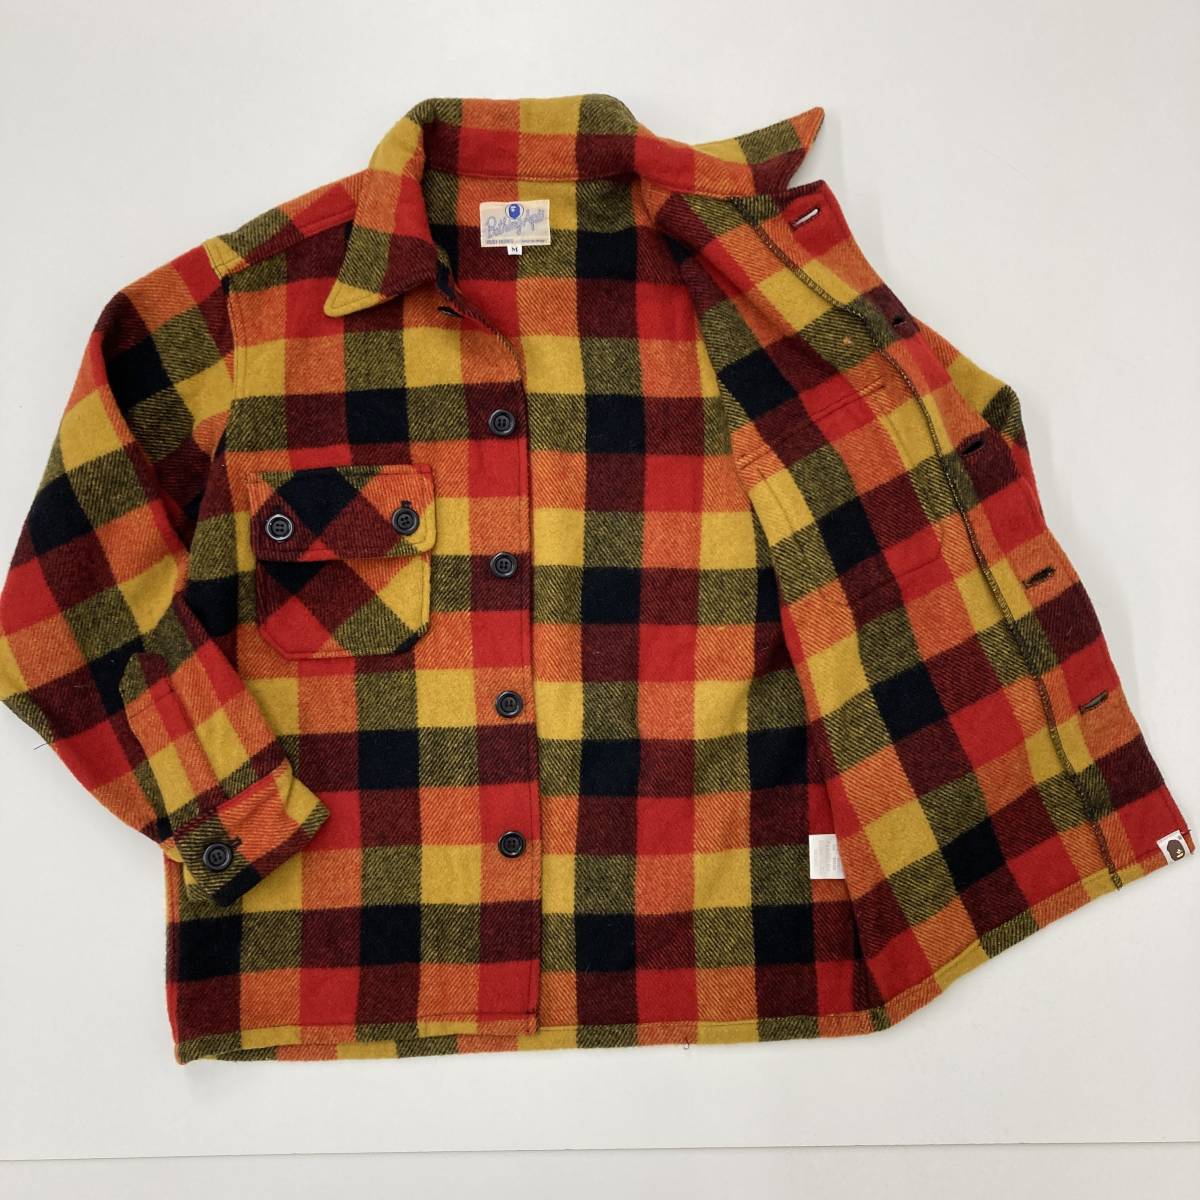  rare most the first period A BATHING APE check wool CPO jacket M size A Bathing Ape Rav jene check VINTAGE archive 3090231